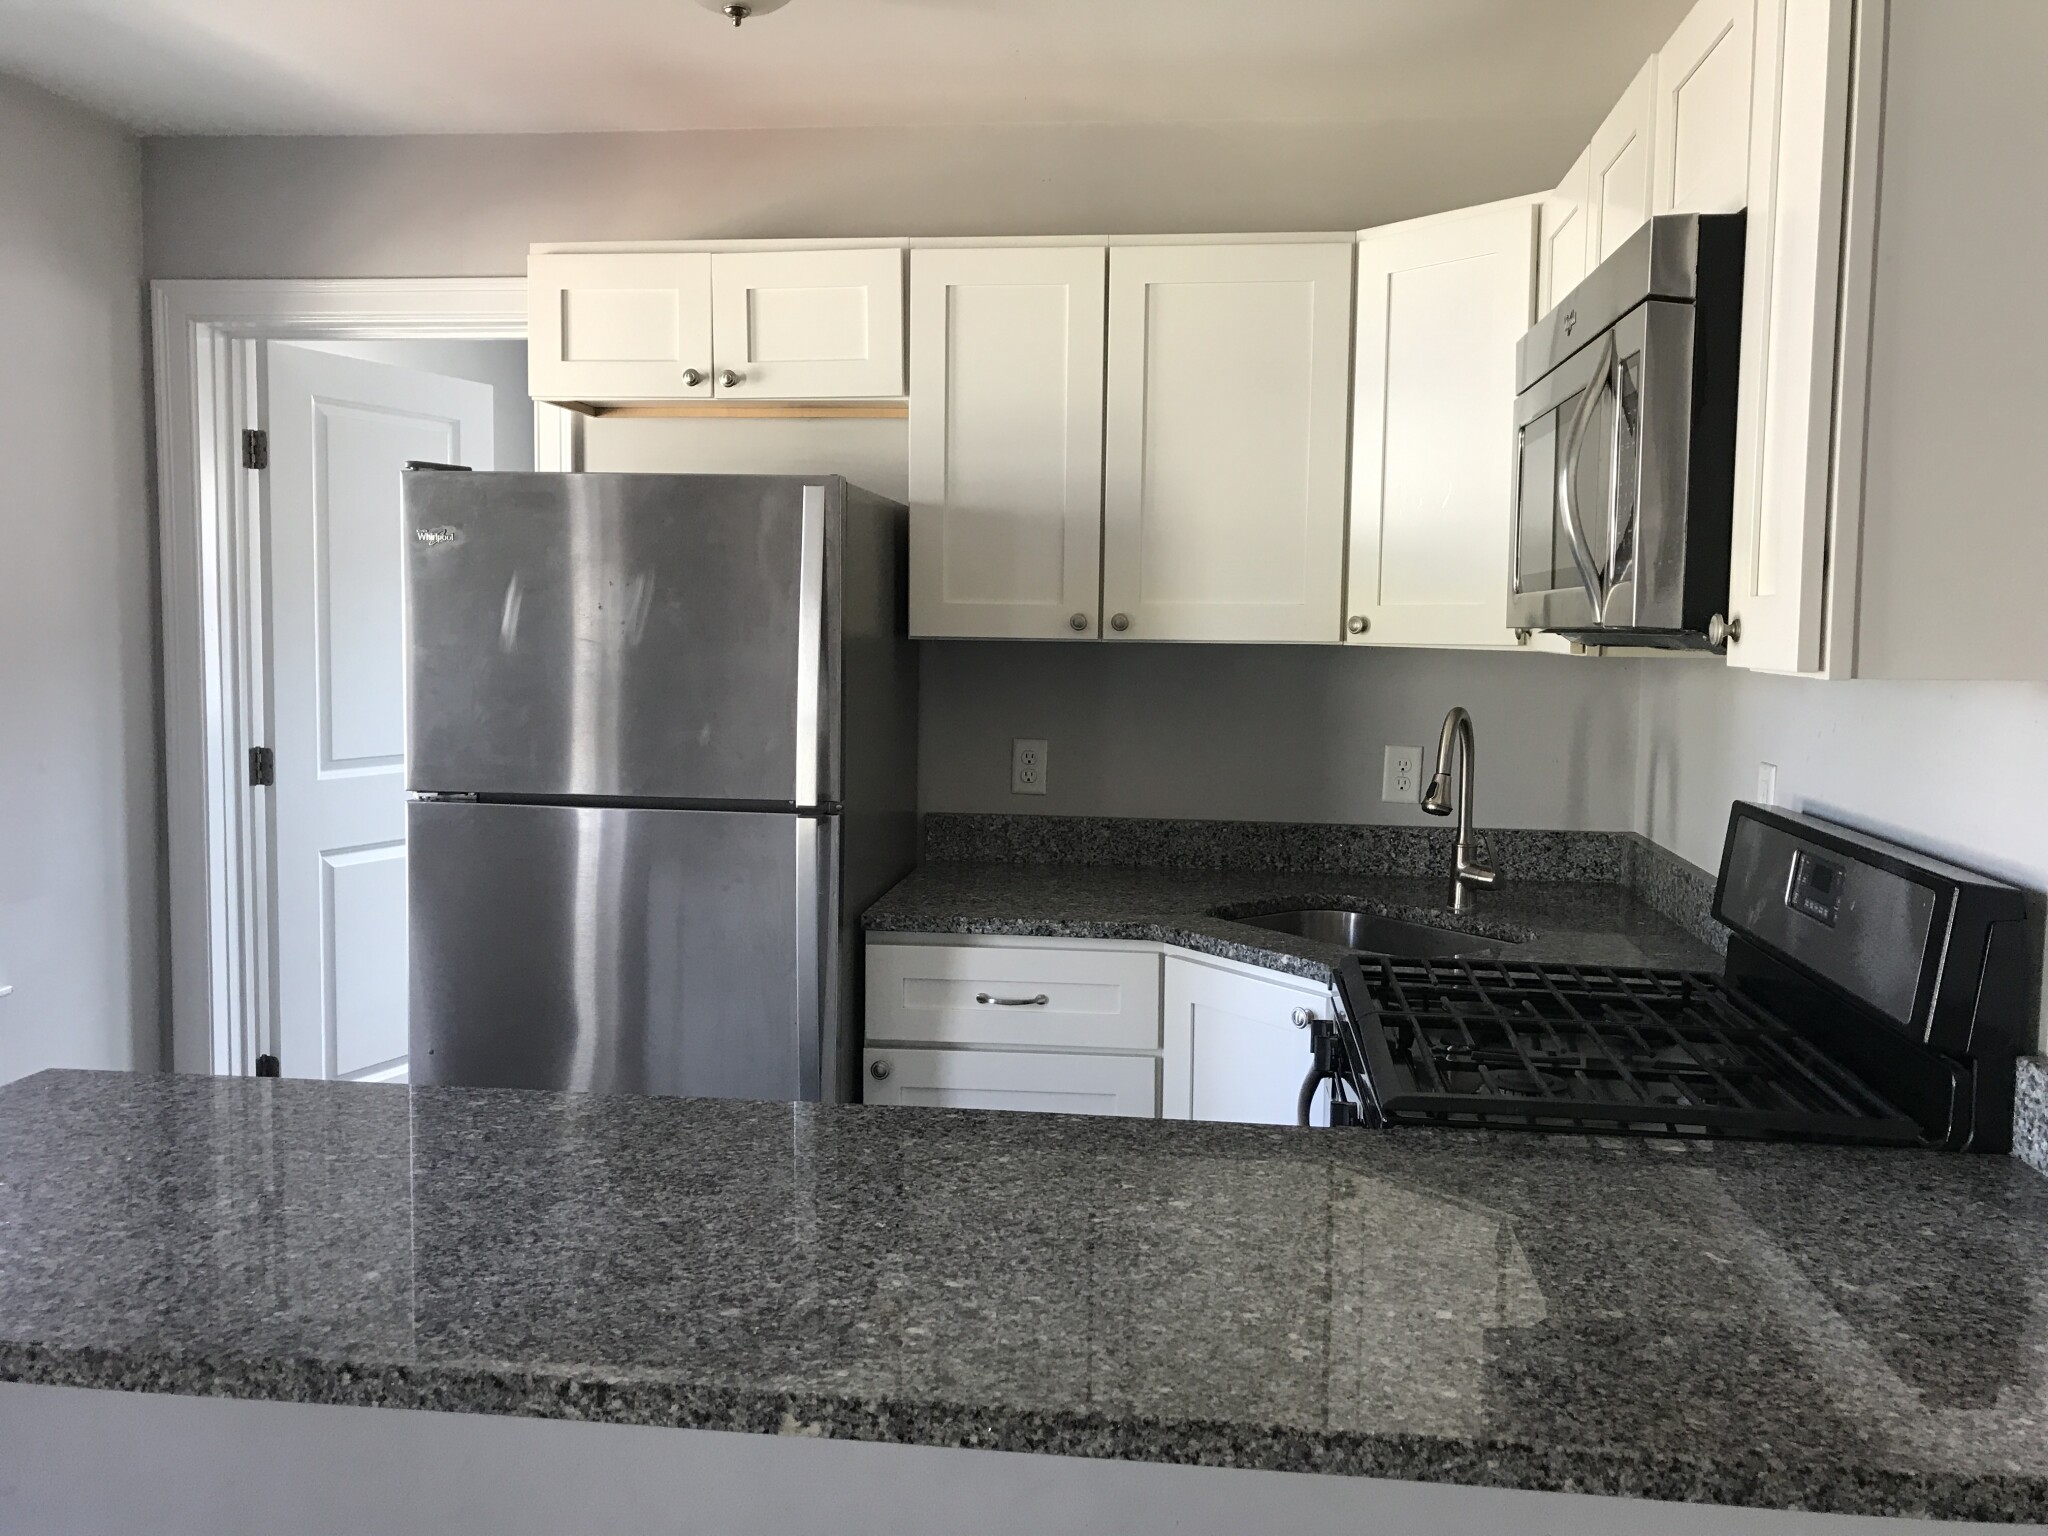 Photos of apartment on Warwick St.,Quincy MA 02170